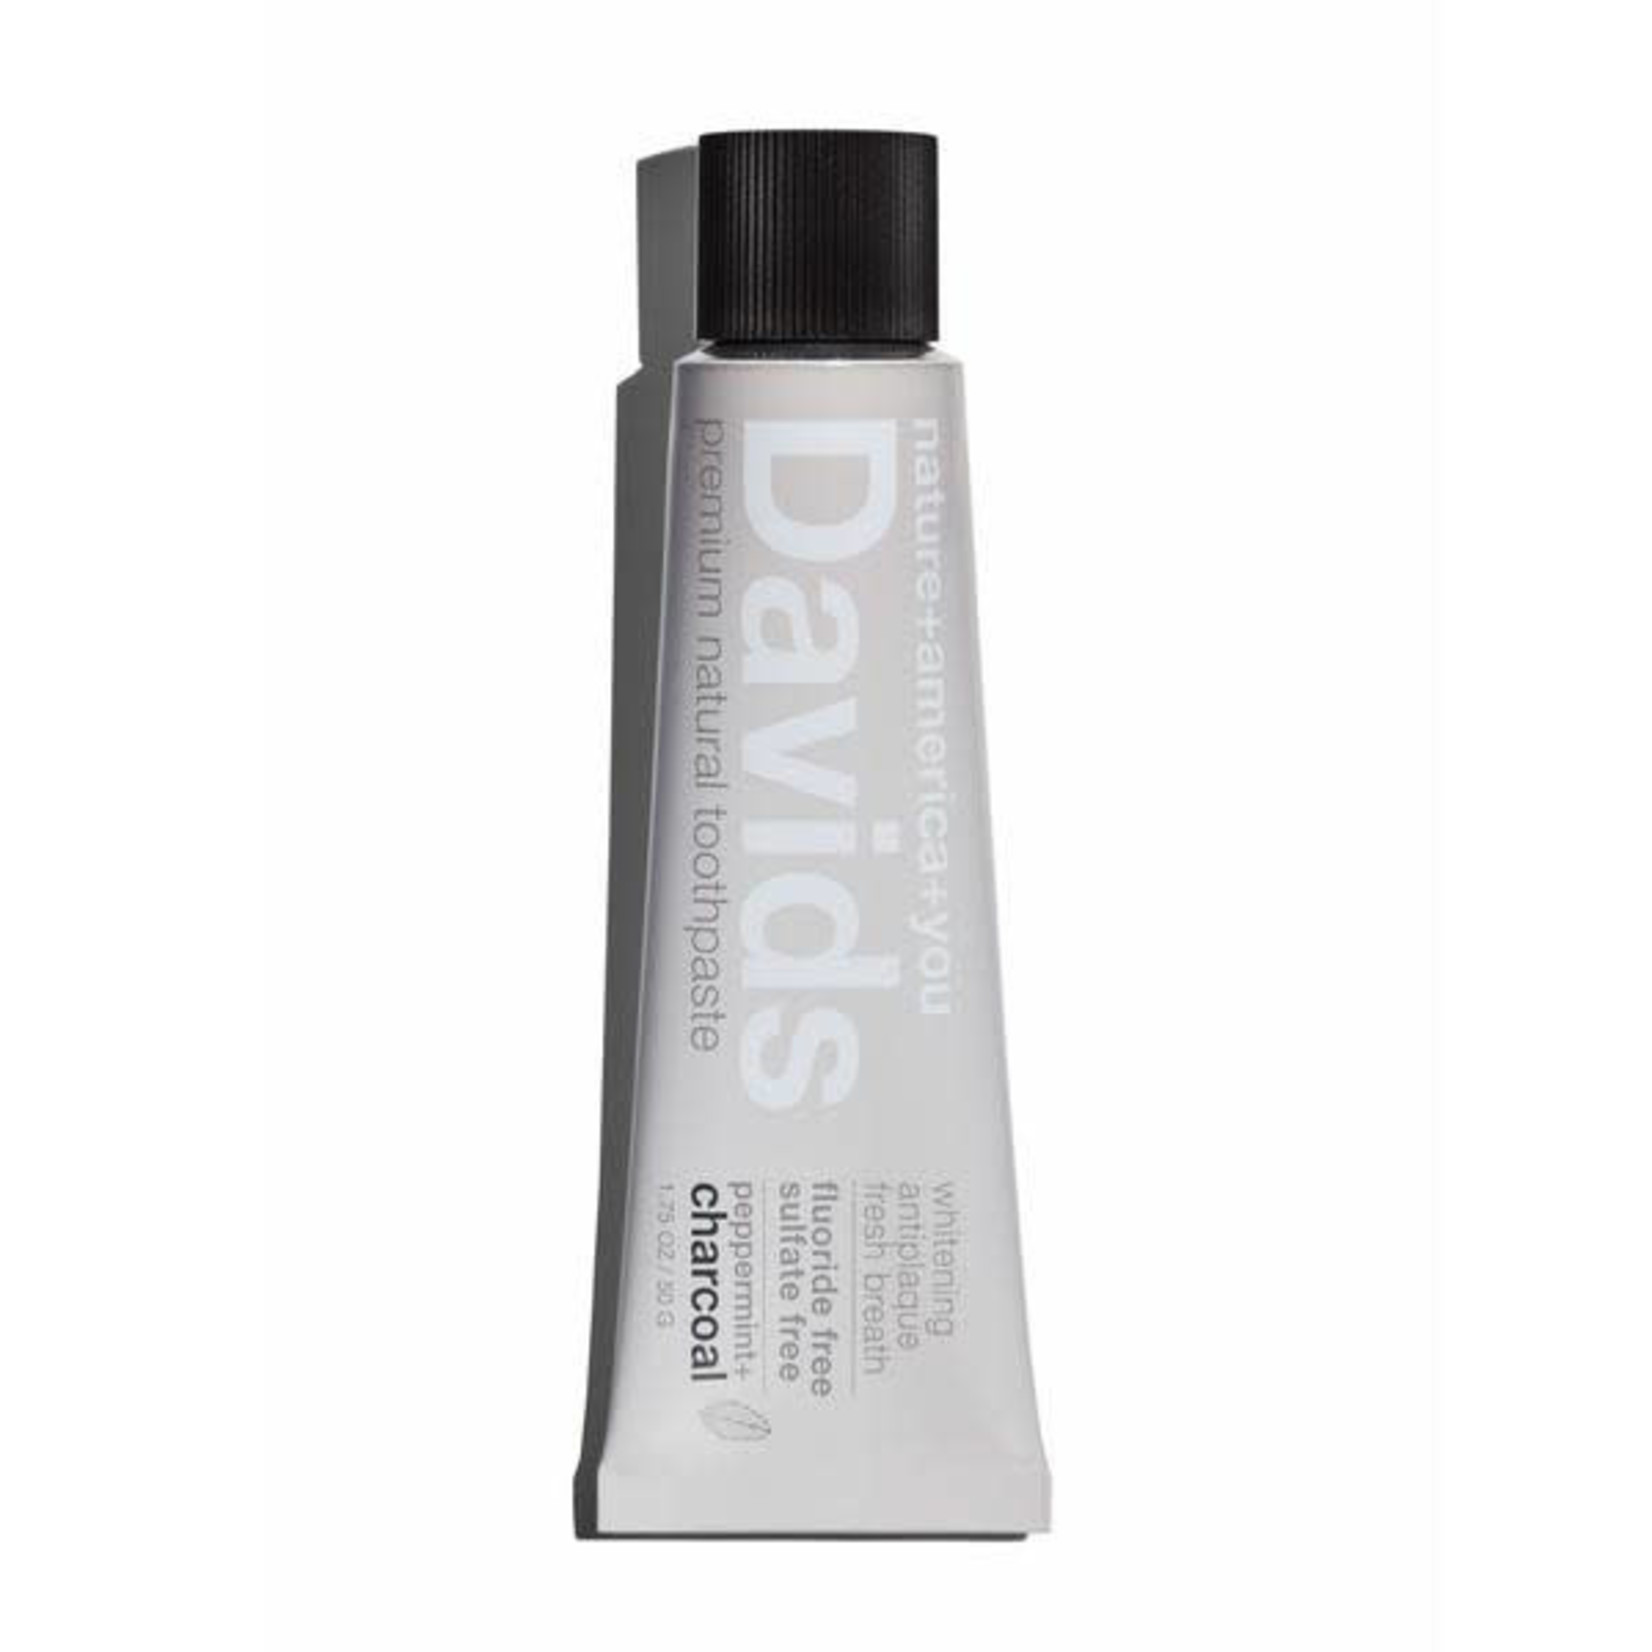 DAVIDS PREMIUM NATURAL TOOTHPASTE - PEPPERMINT + CHARCOAL